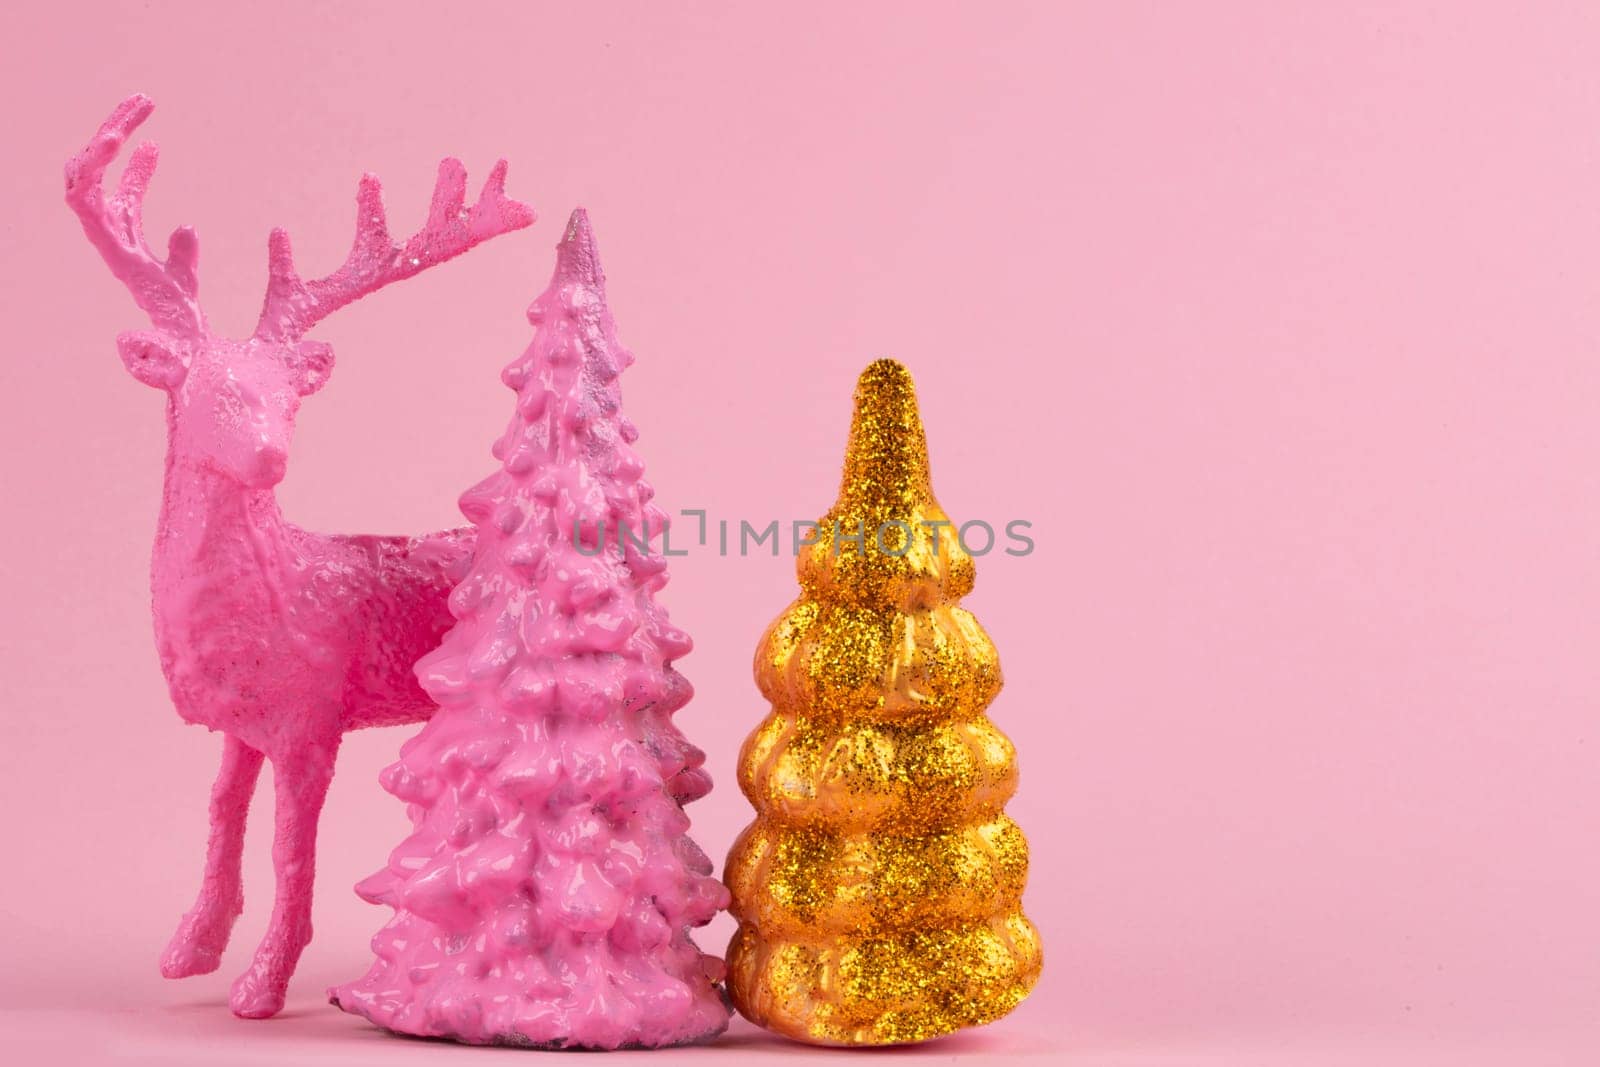 Festive Christmas background. Pink deer near miniature pink and gold Christmas trees.